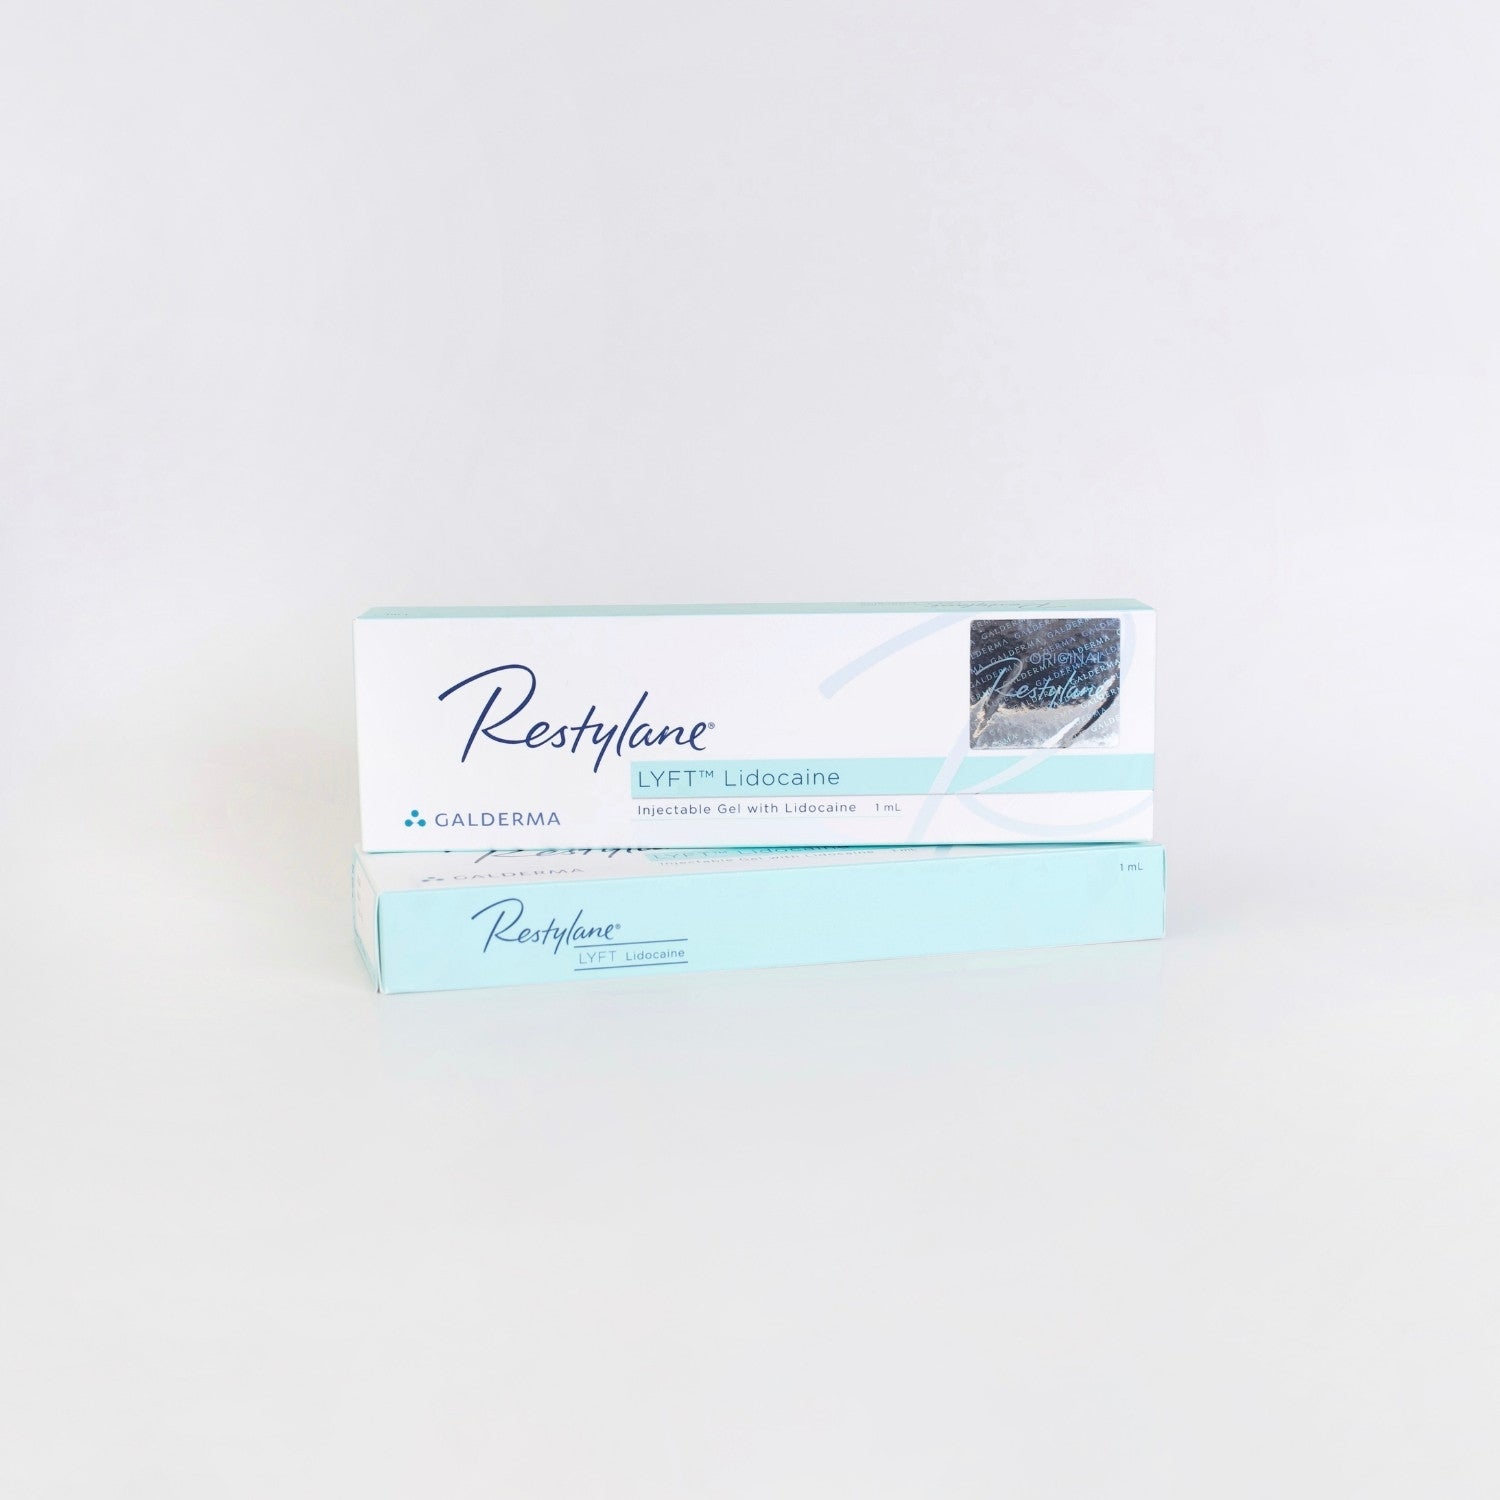 restylane lyft with lidocaine, restylane lyft perlane 1x1ml, Dermal Filler, Restylane Dermal Filler, Galderma, front view of 2 boxes by Skincare Supply Store